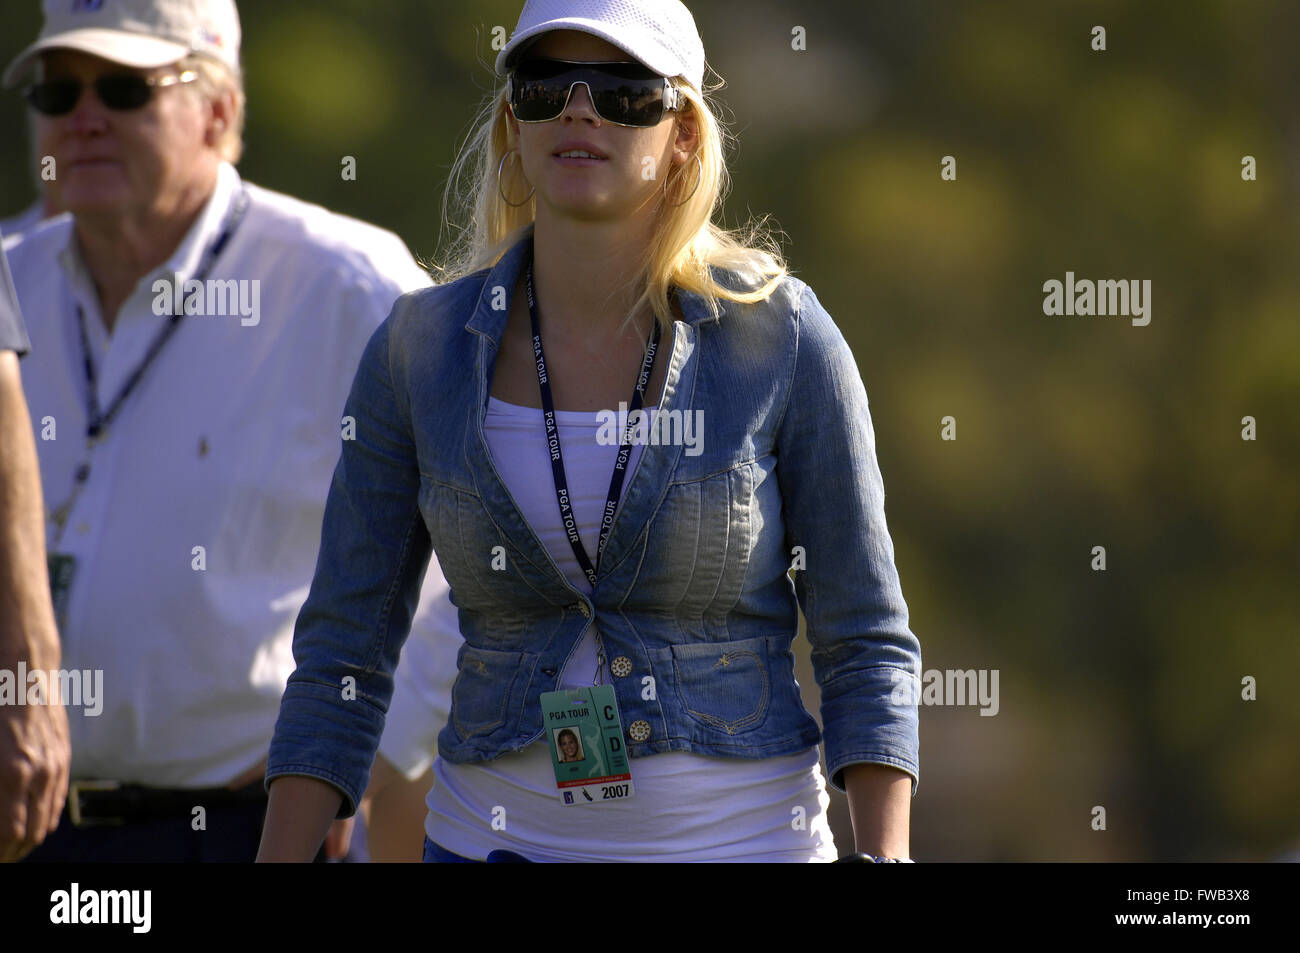 March 15, 2007 - Orlando, FL, United States of America - Tiger Woods' wife Elin Nordegren during the Arnold Palmer Invitational at Bay Hill Club and Lodge on March 15, 2007 in Orlando, Florida...ZUMA Press/Scott A. Miller (Credit Image: © Scott A. Miller via ZUMA Wire) Stock Photo